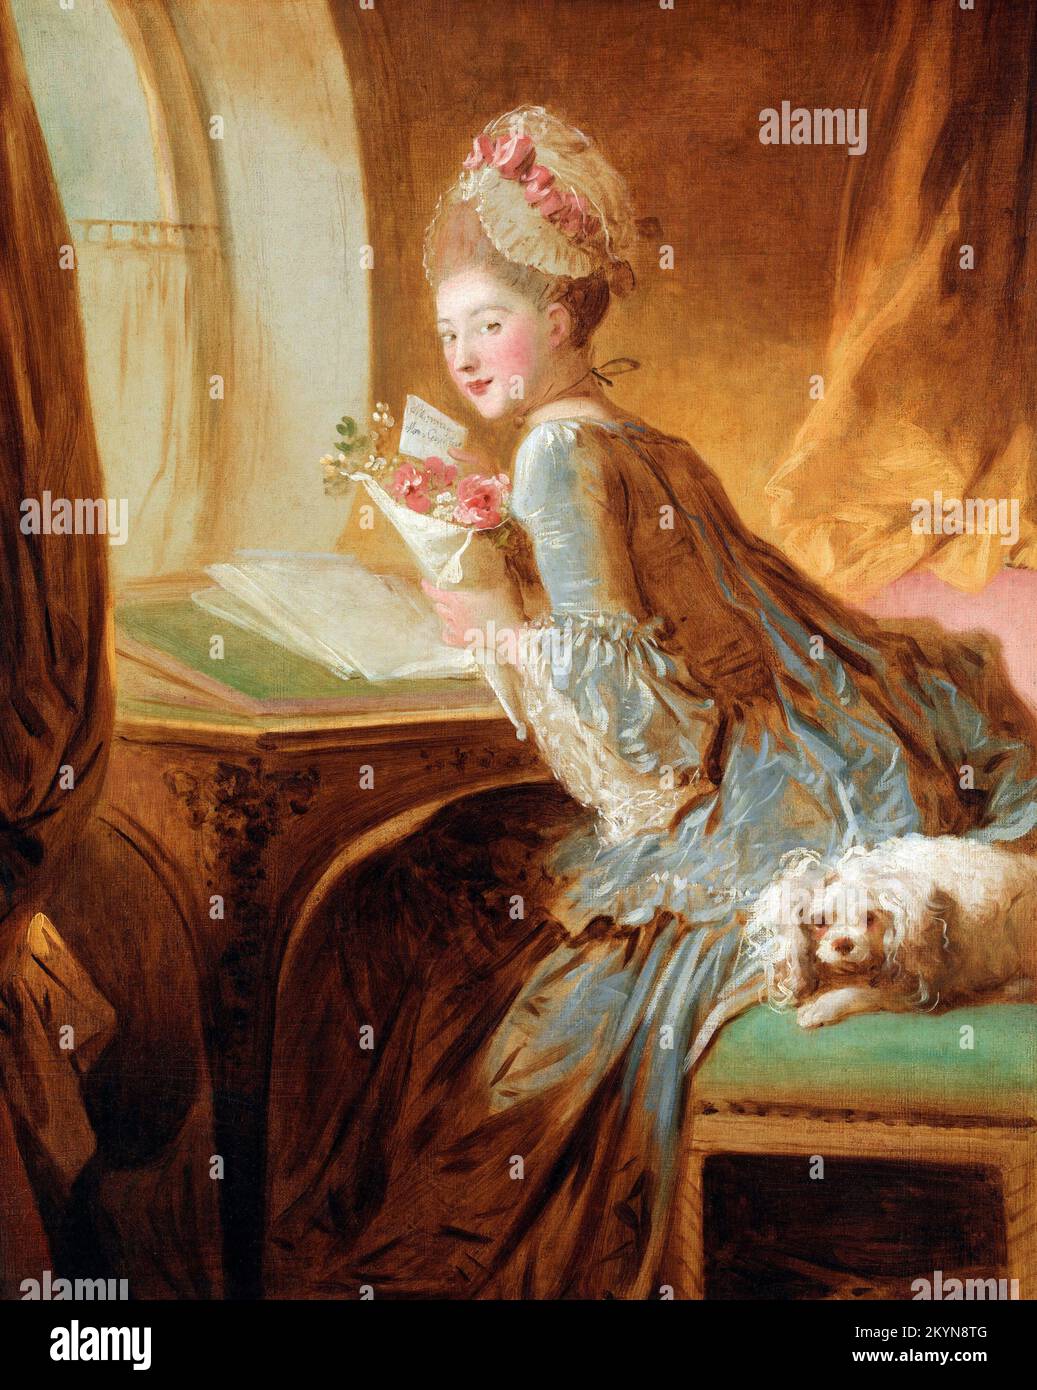 The Love Letter by Jean-Honoré Fragonard (1732-1806), oil on canvas, early 1770s Stock Photo